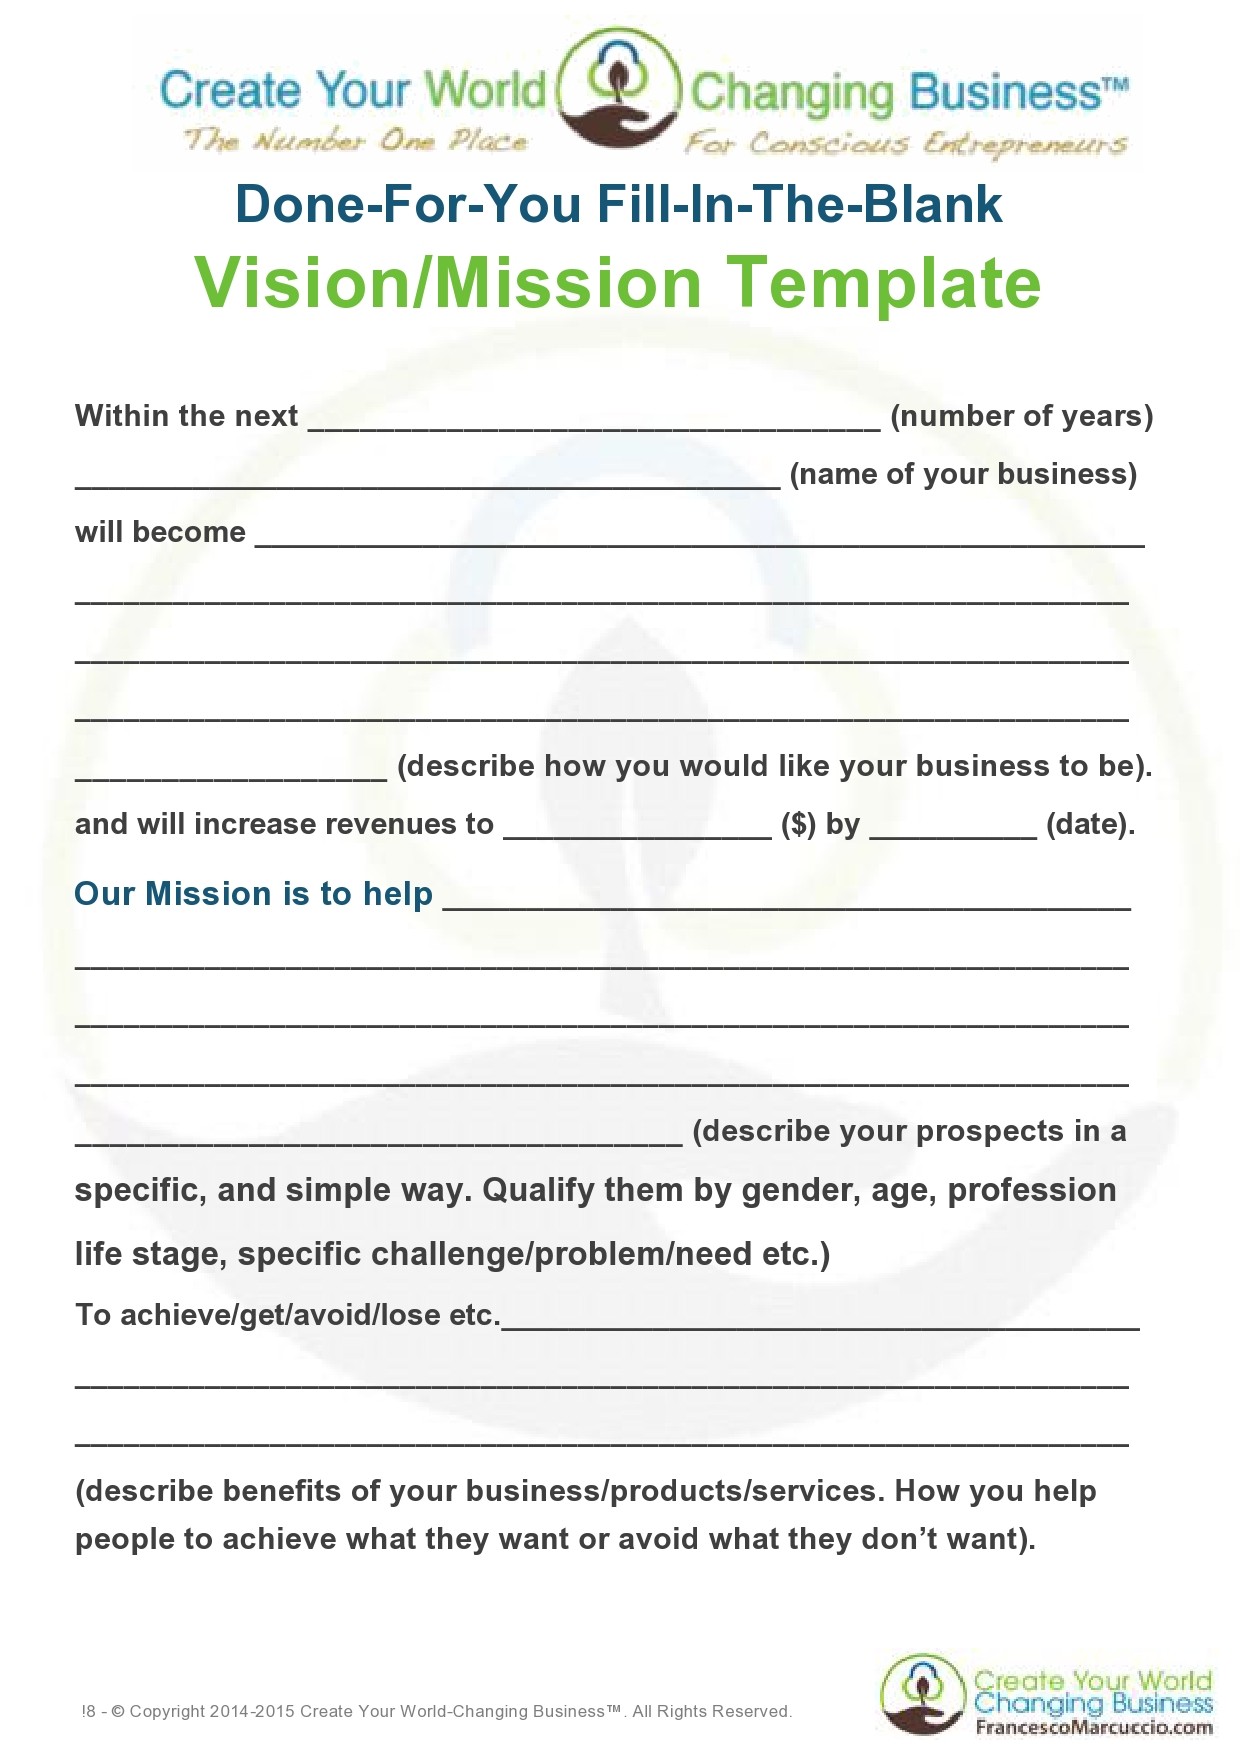 Free vision statement template 13